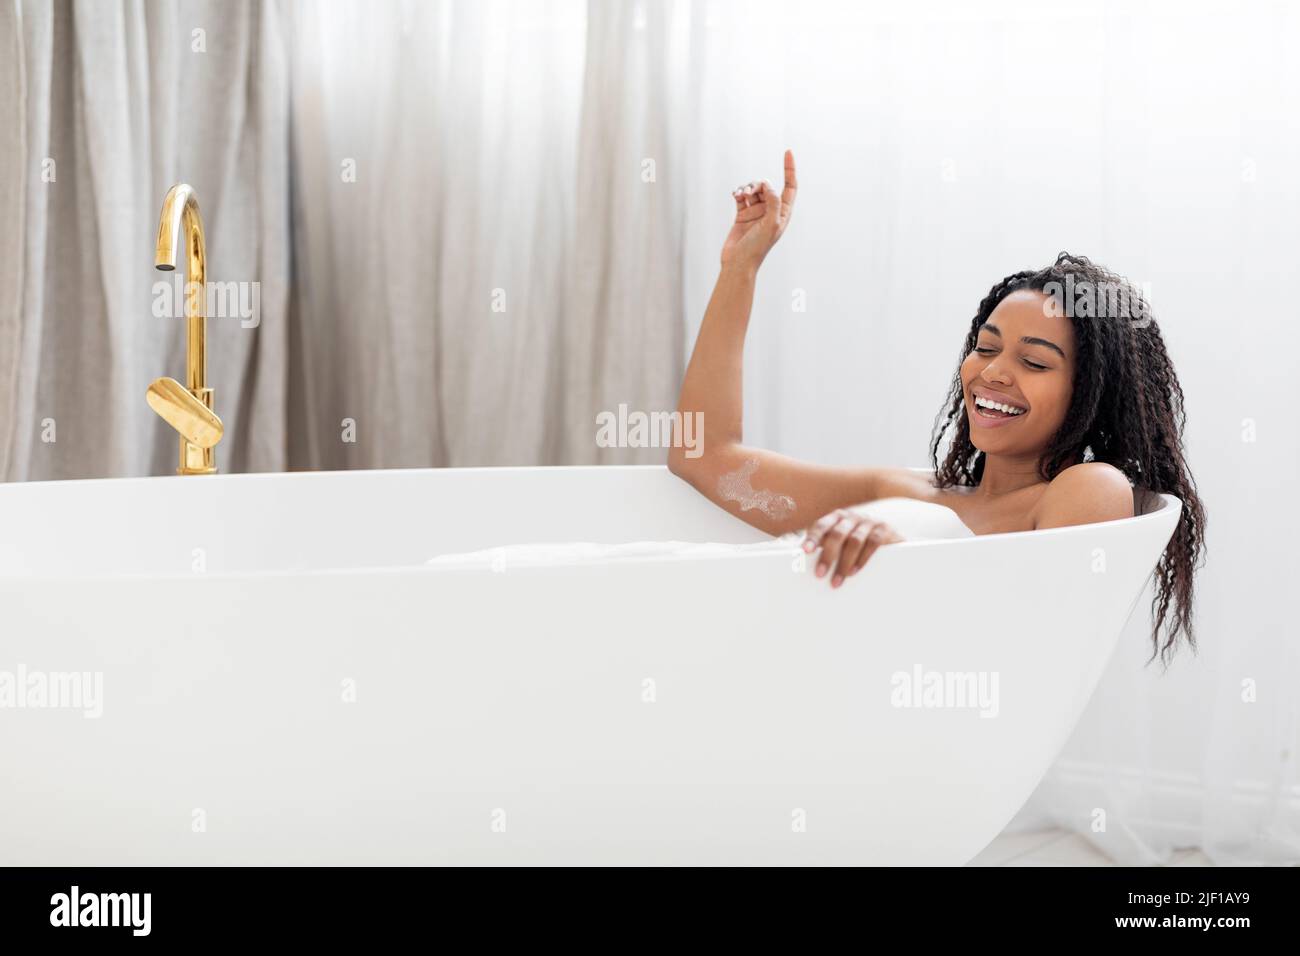 Carefree Black Lady Singing And Having Fun While Relaxing In Bathtub Stock Photo